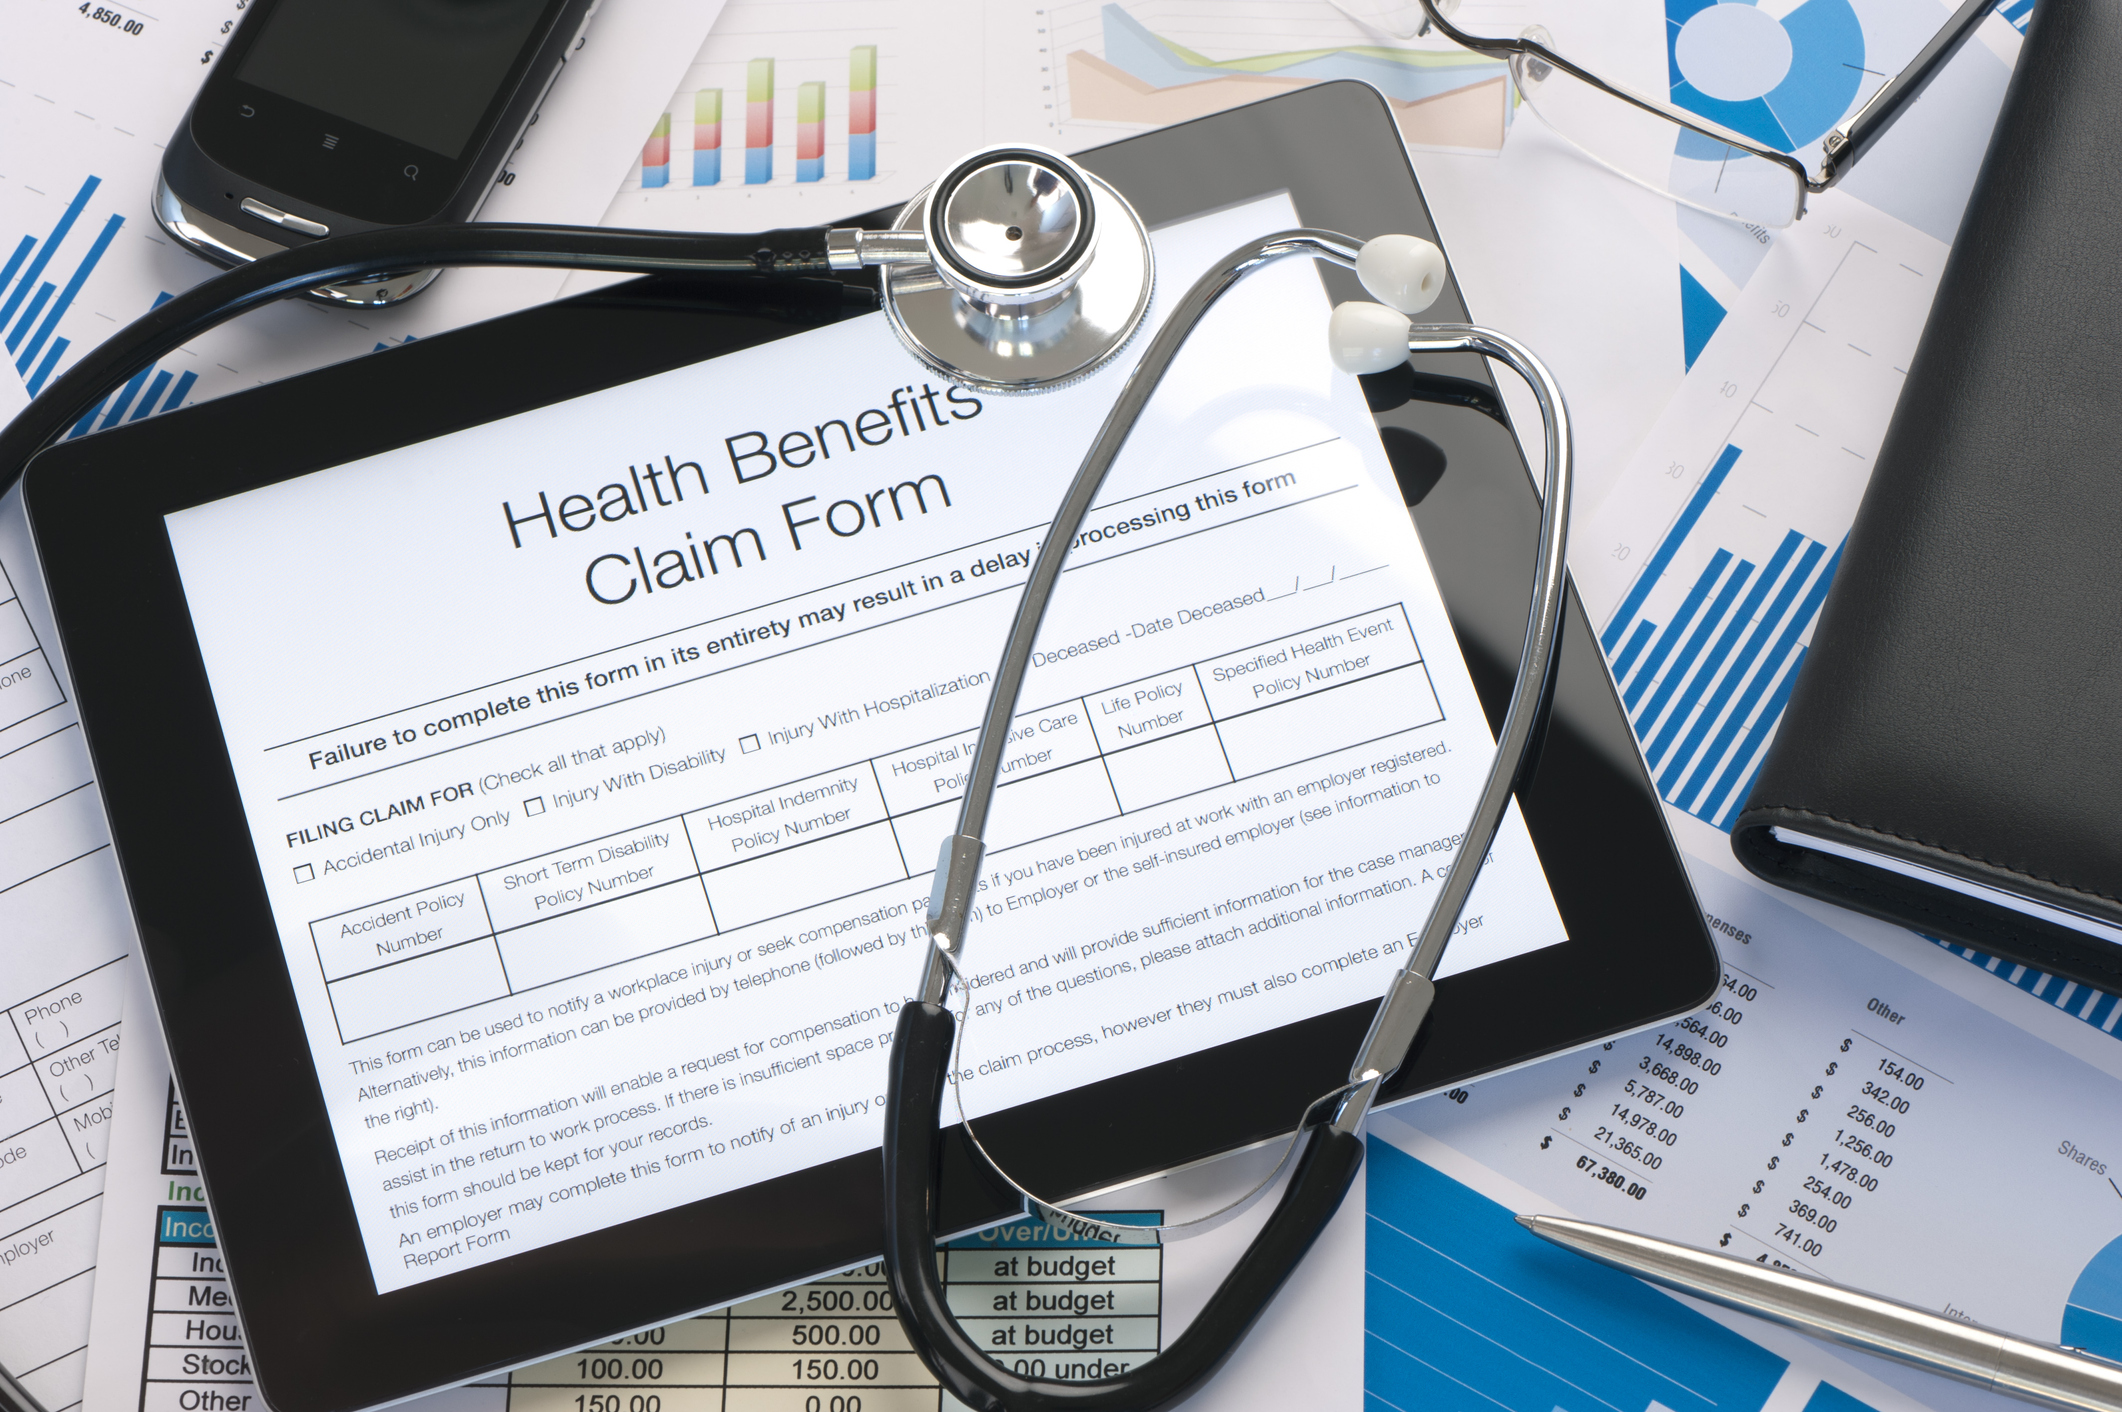 Online health benefits claim form pictured on a tablet